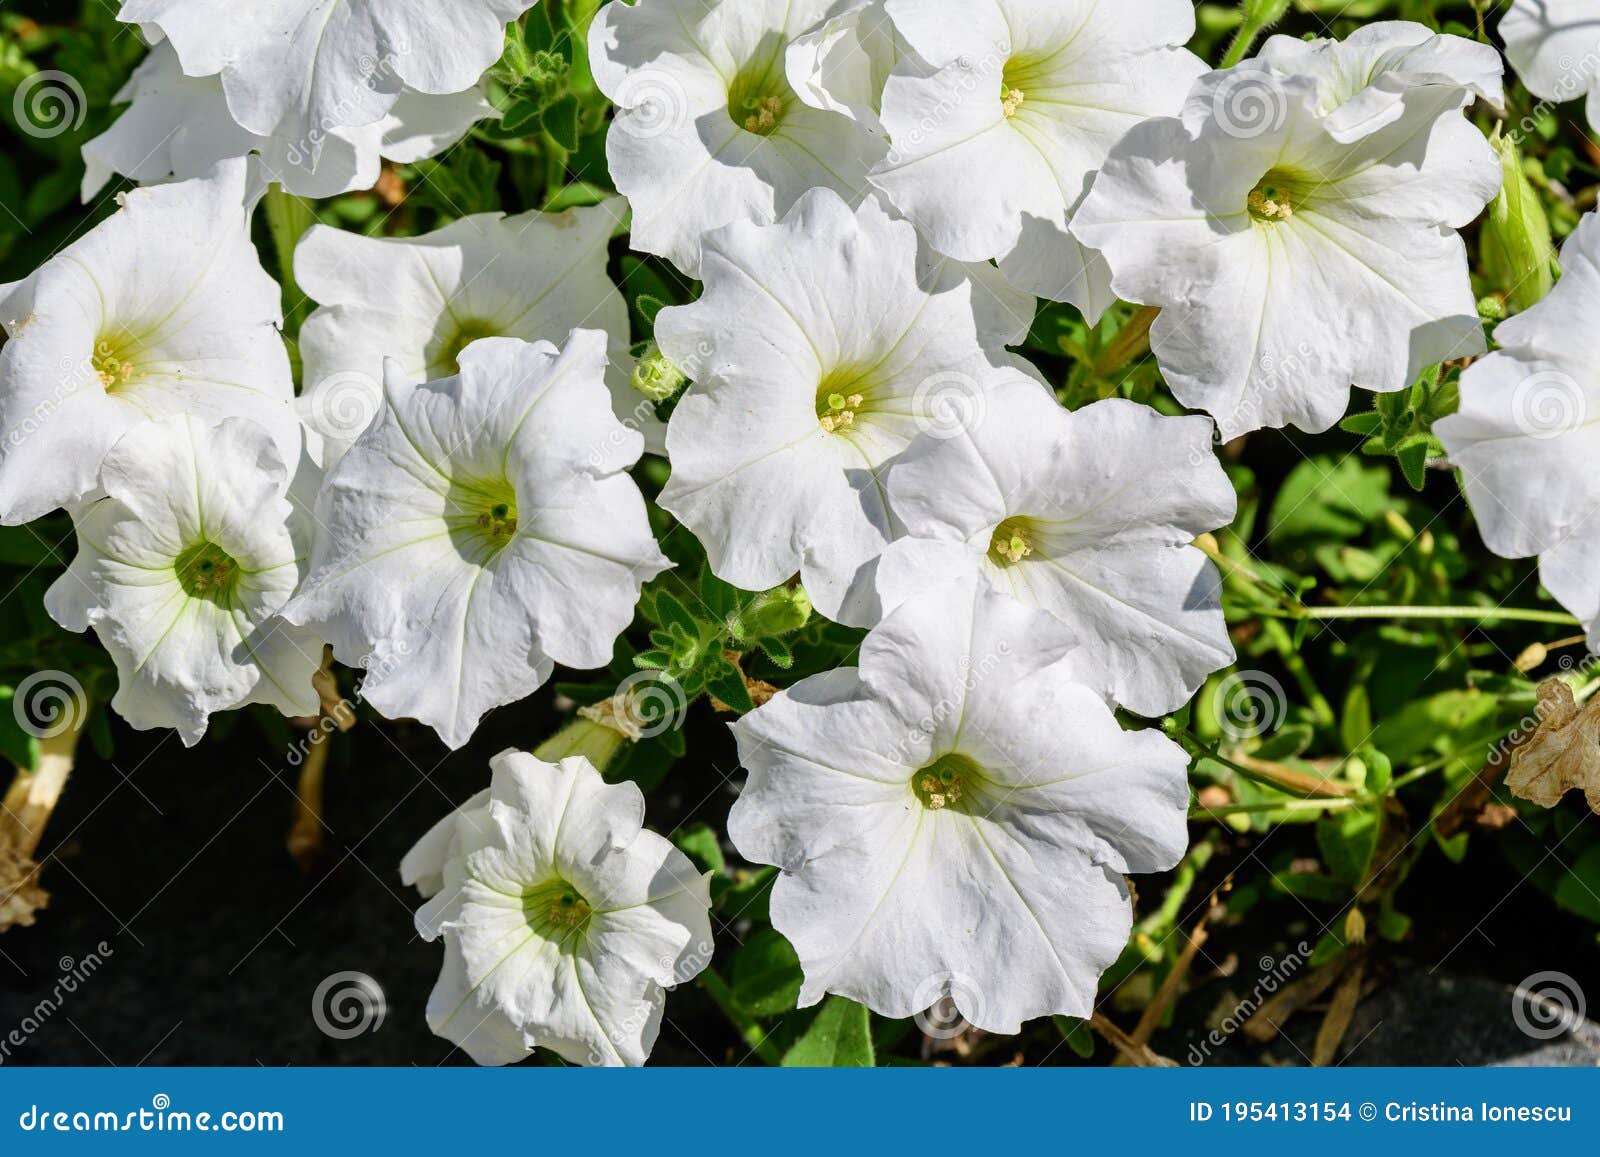 White Petunia Axillaris Flowers In A Sunny Spring Garden Fresh Natural And Floral Background Stock Photo Image Of Gardening Green 195413154